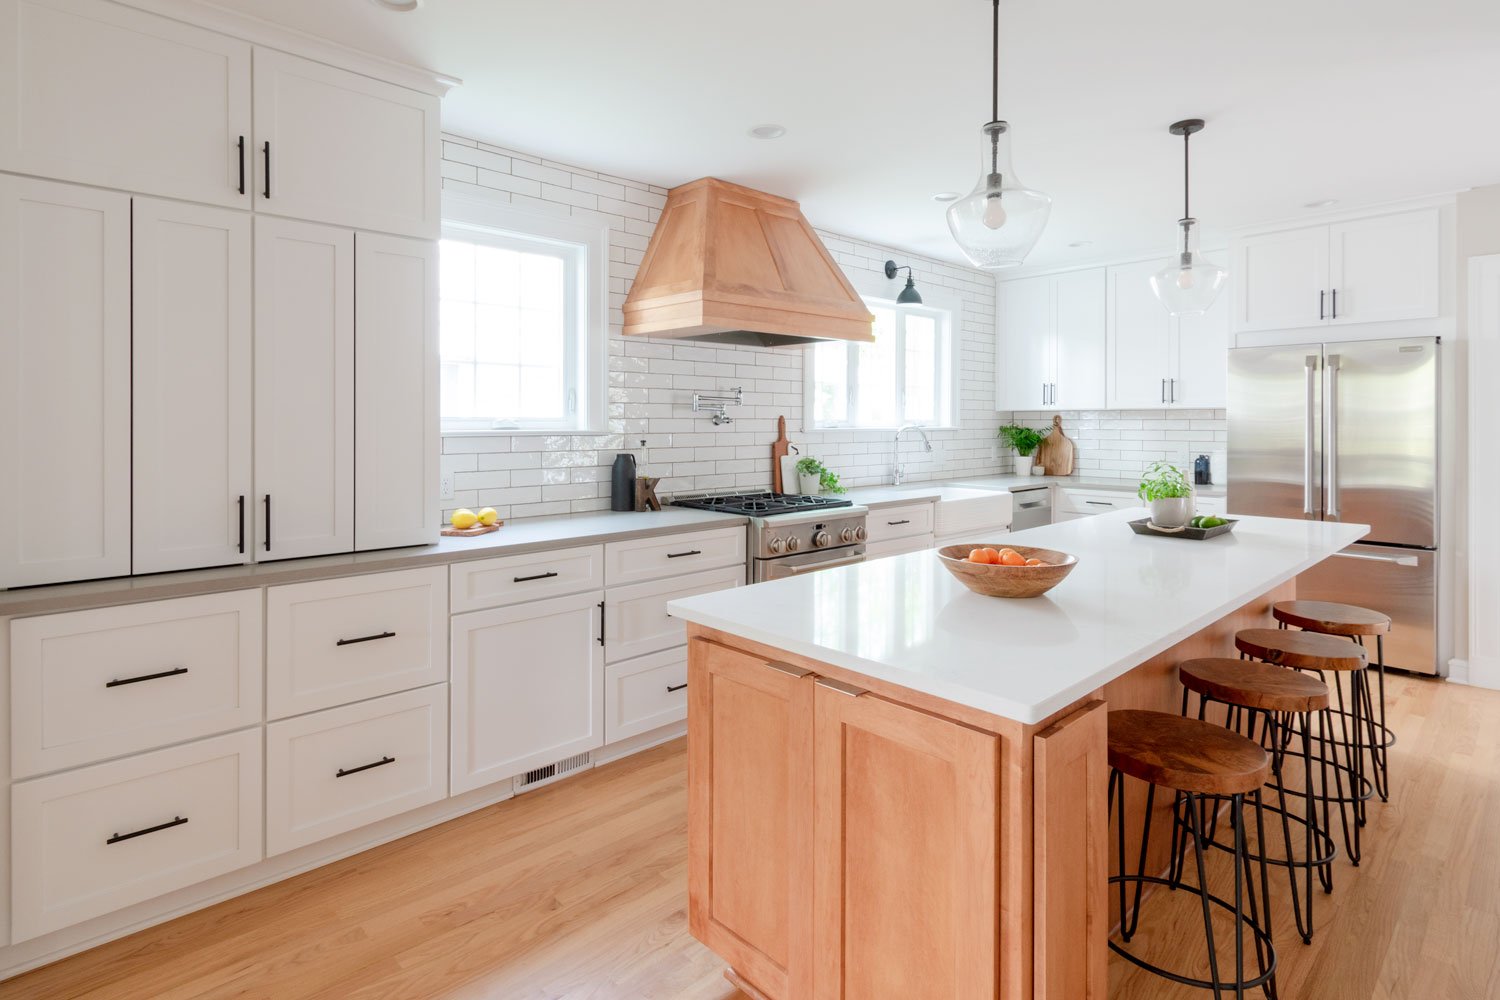 Open concept kitchen with white shaker cabinets and wood island